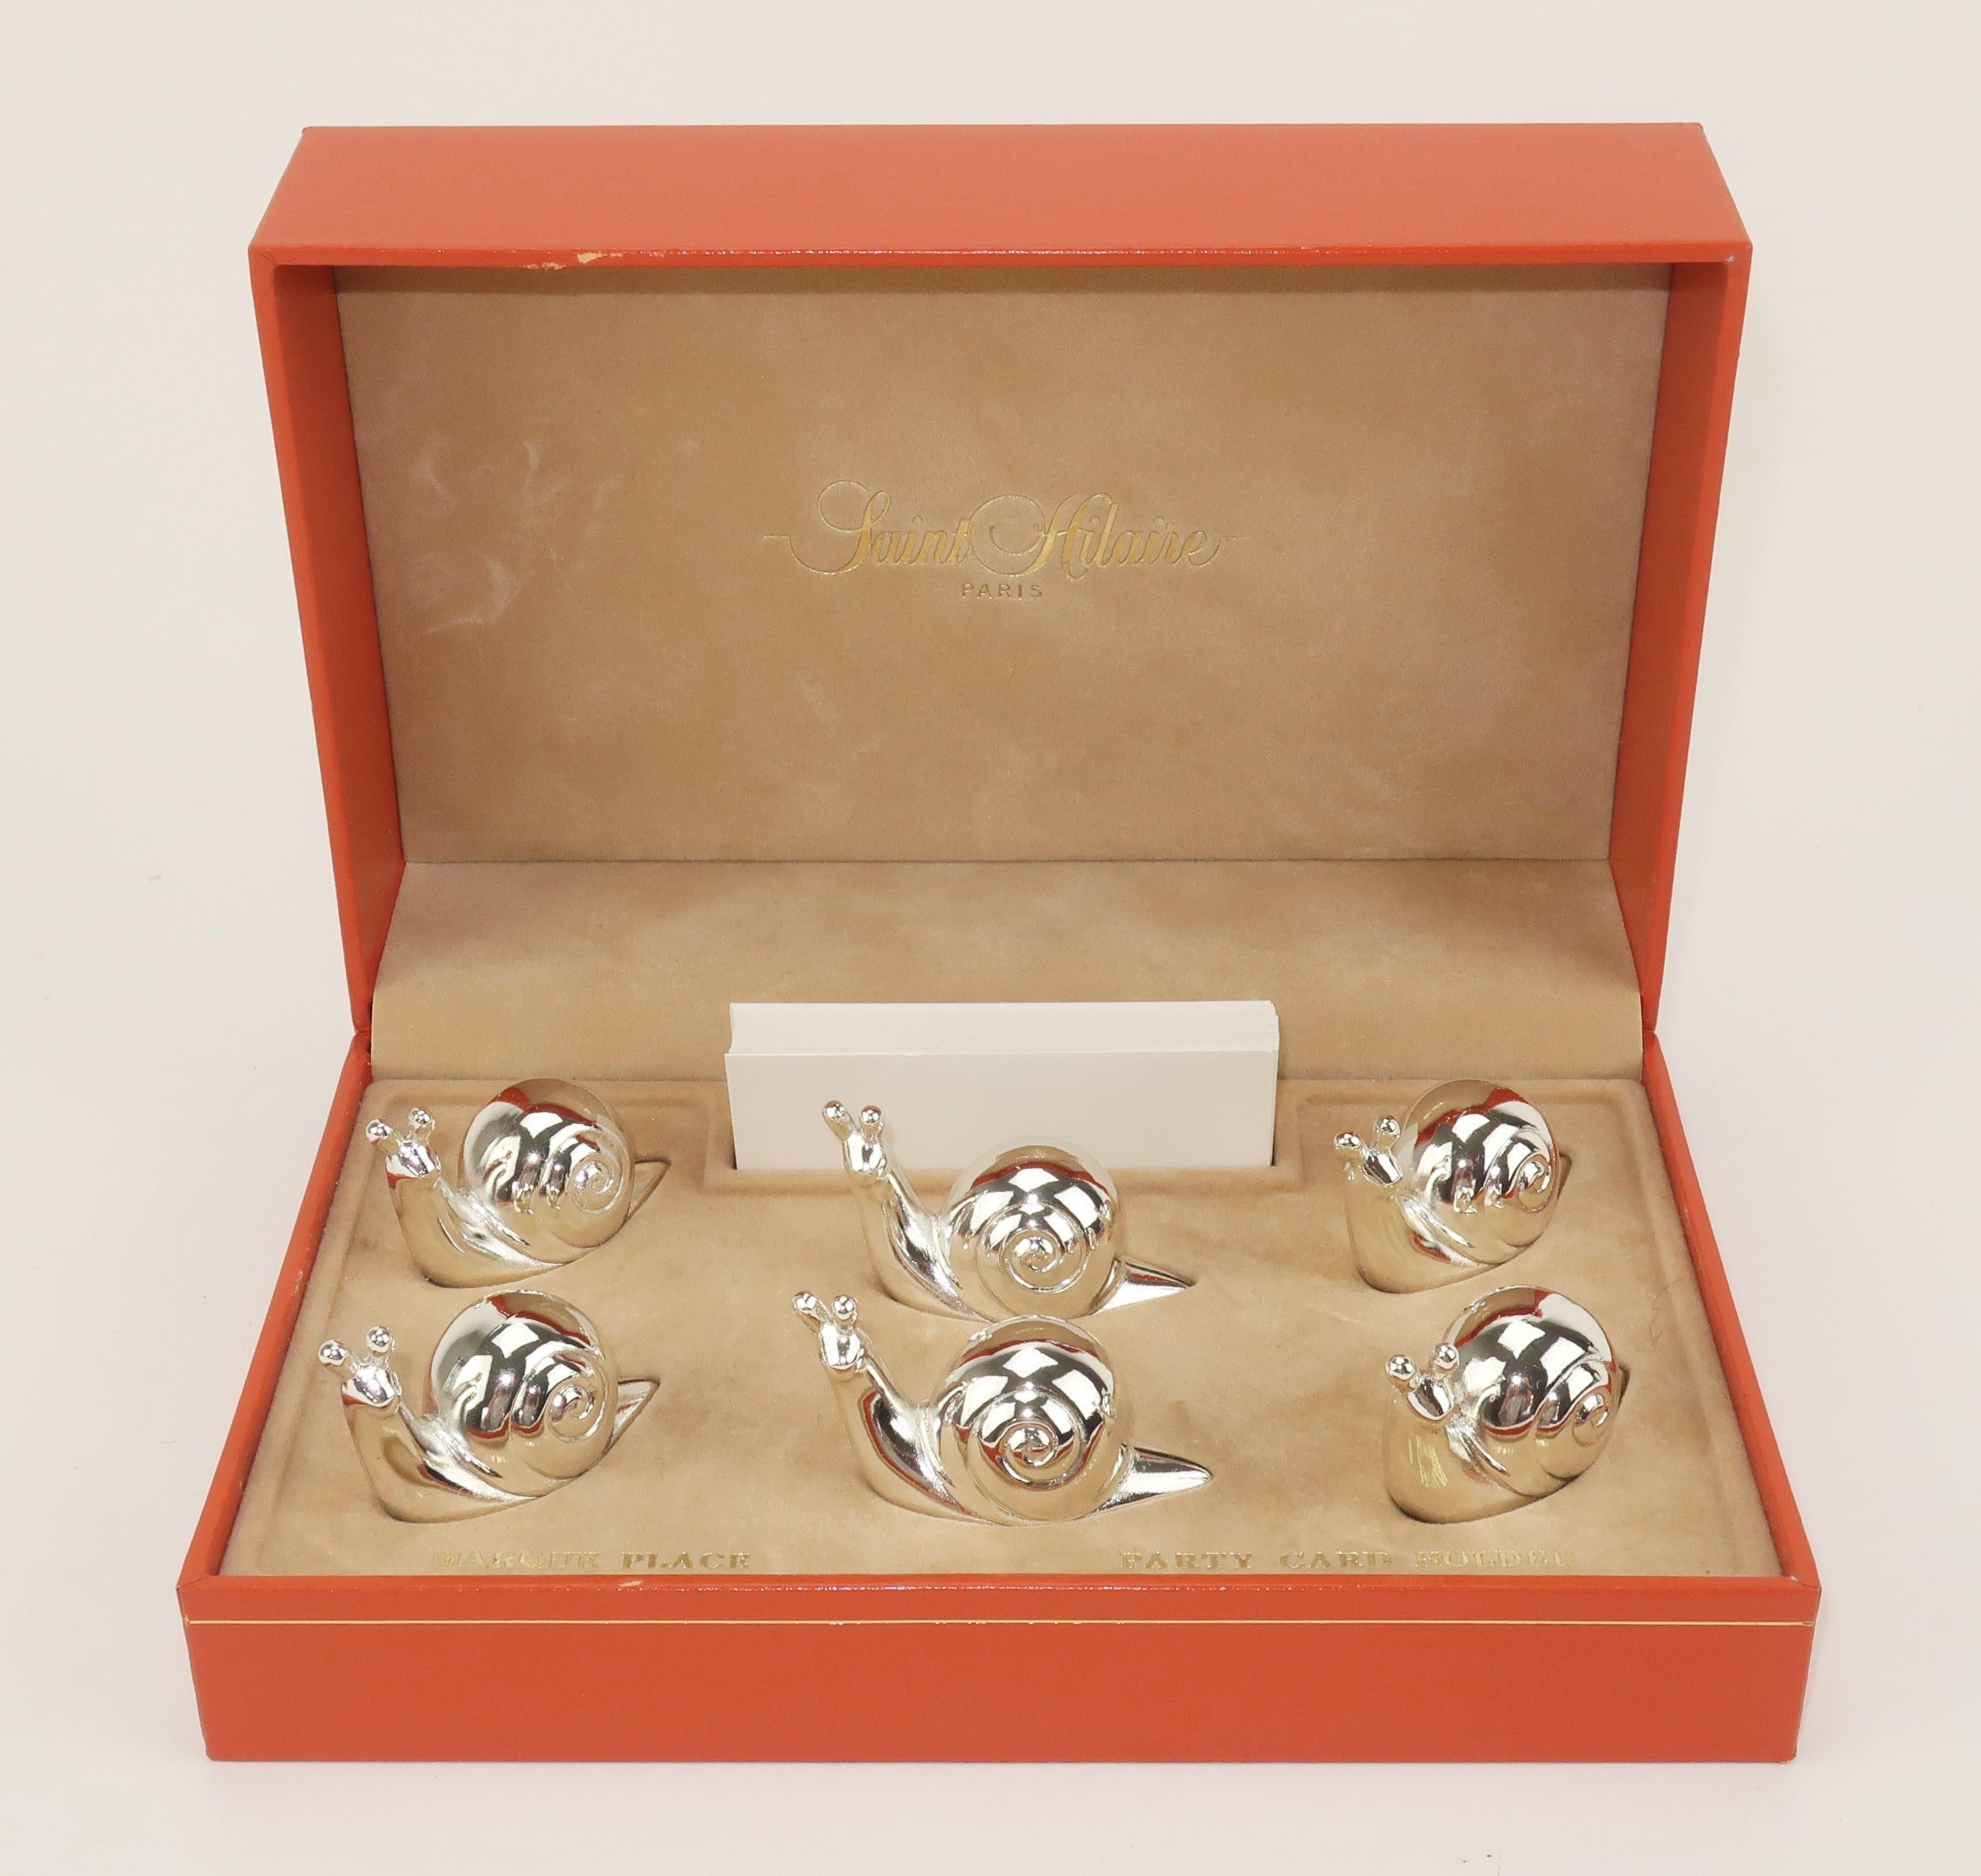 Set of 6 silverplate snail place card holders in the original box by Saint Hilaire of Paris. The whimsical snails have a low maintenance varnished finish and offer a hidden card slot at the base. The set is accompanied by a stack of white cards. A